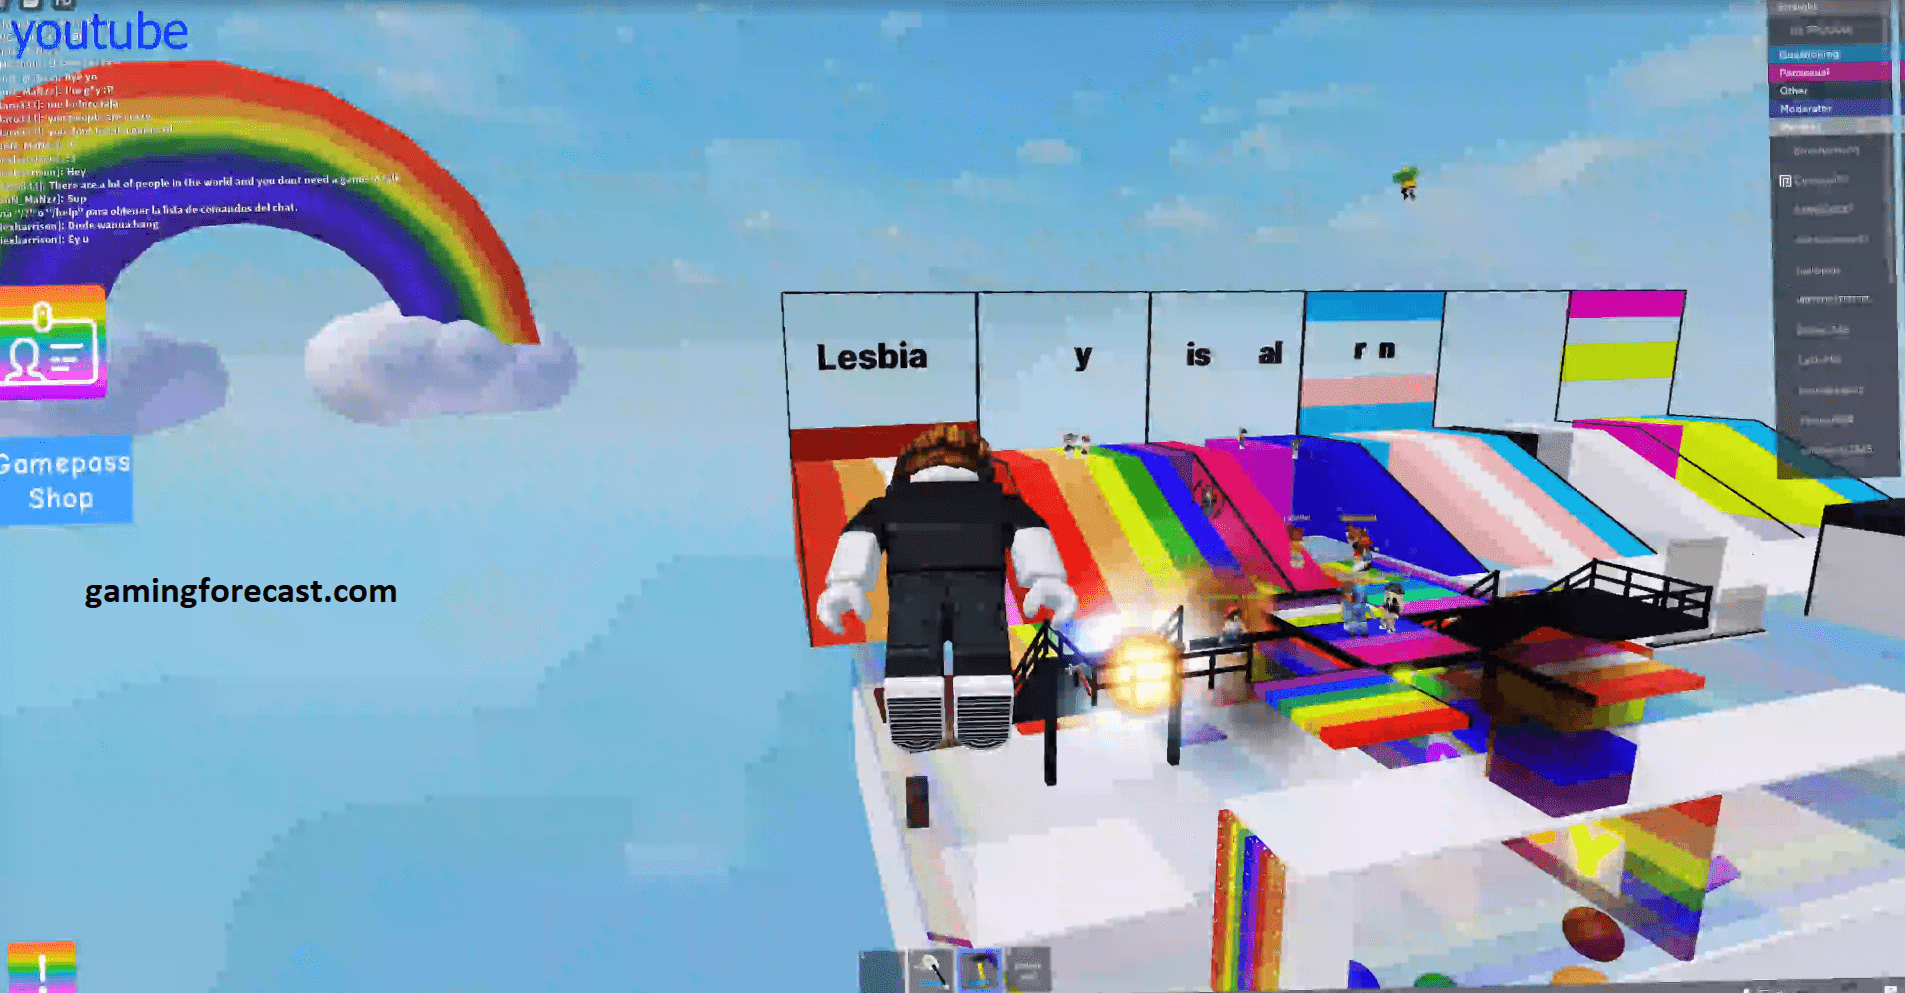 Roblox Hack Download Pc Destroy Lobby Fly Aimbot Scripts 2021 Gaming Forecast Download Free Online Game Hacks - roblox hack account script